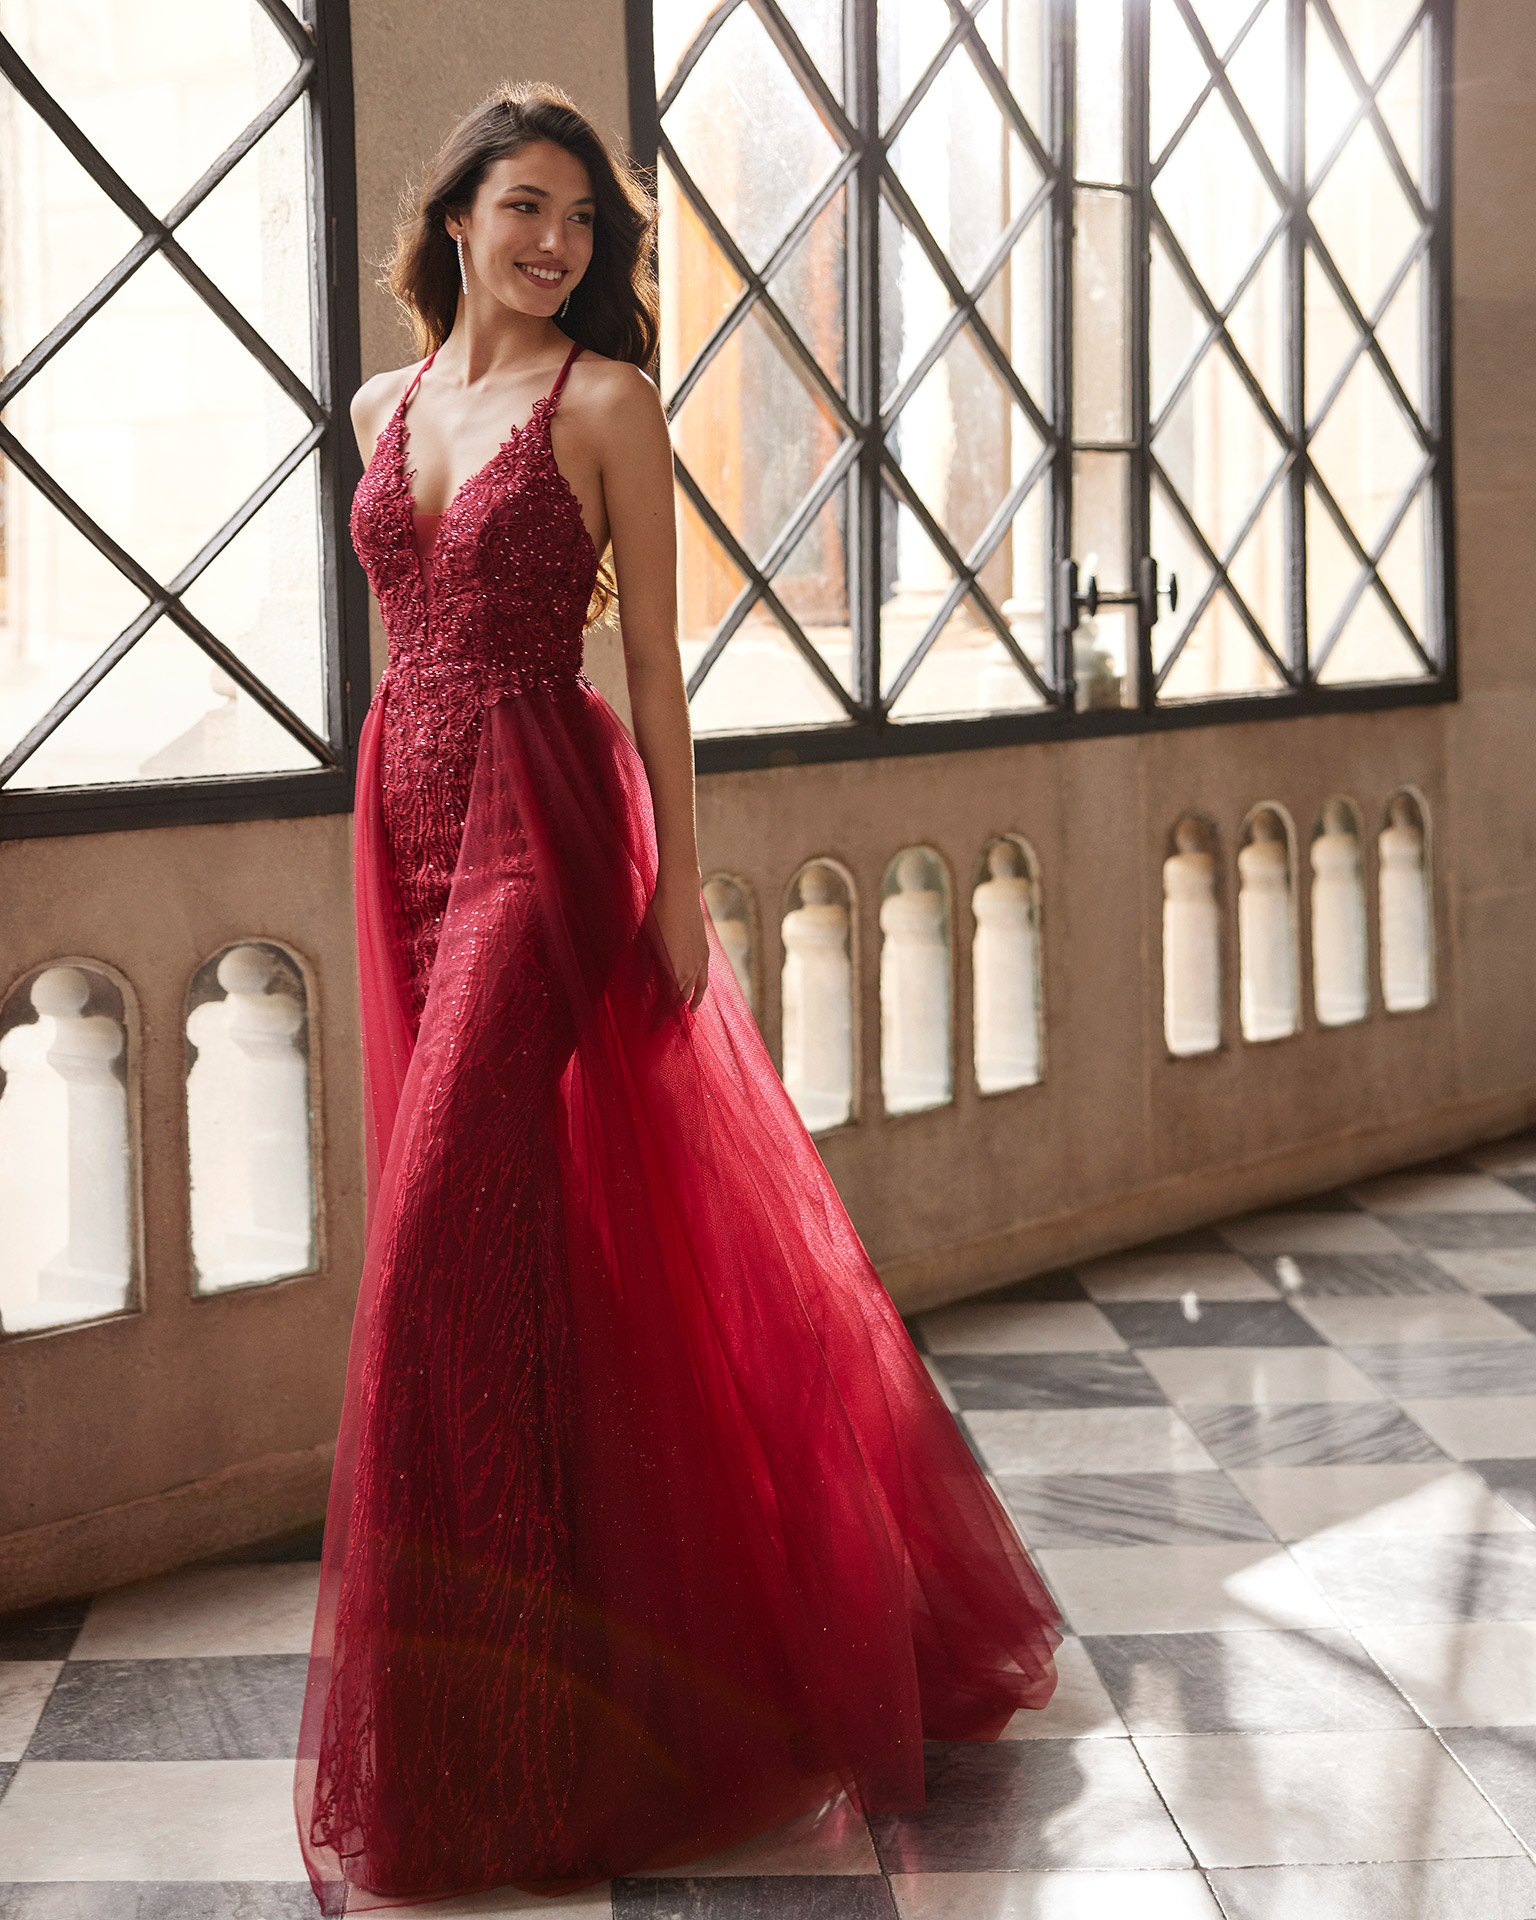 Romantic long evening dress made of lace with beadwork. Marfil Barcelona design with a plunging V-neckline, a tulle skirt, and a back with straps. MARFIL_BARCELONA.